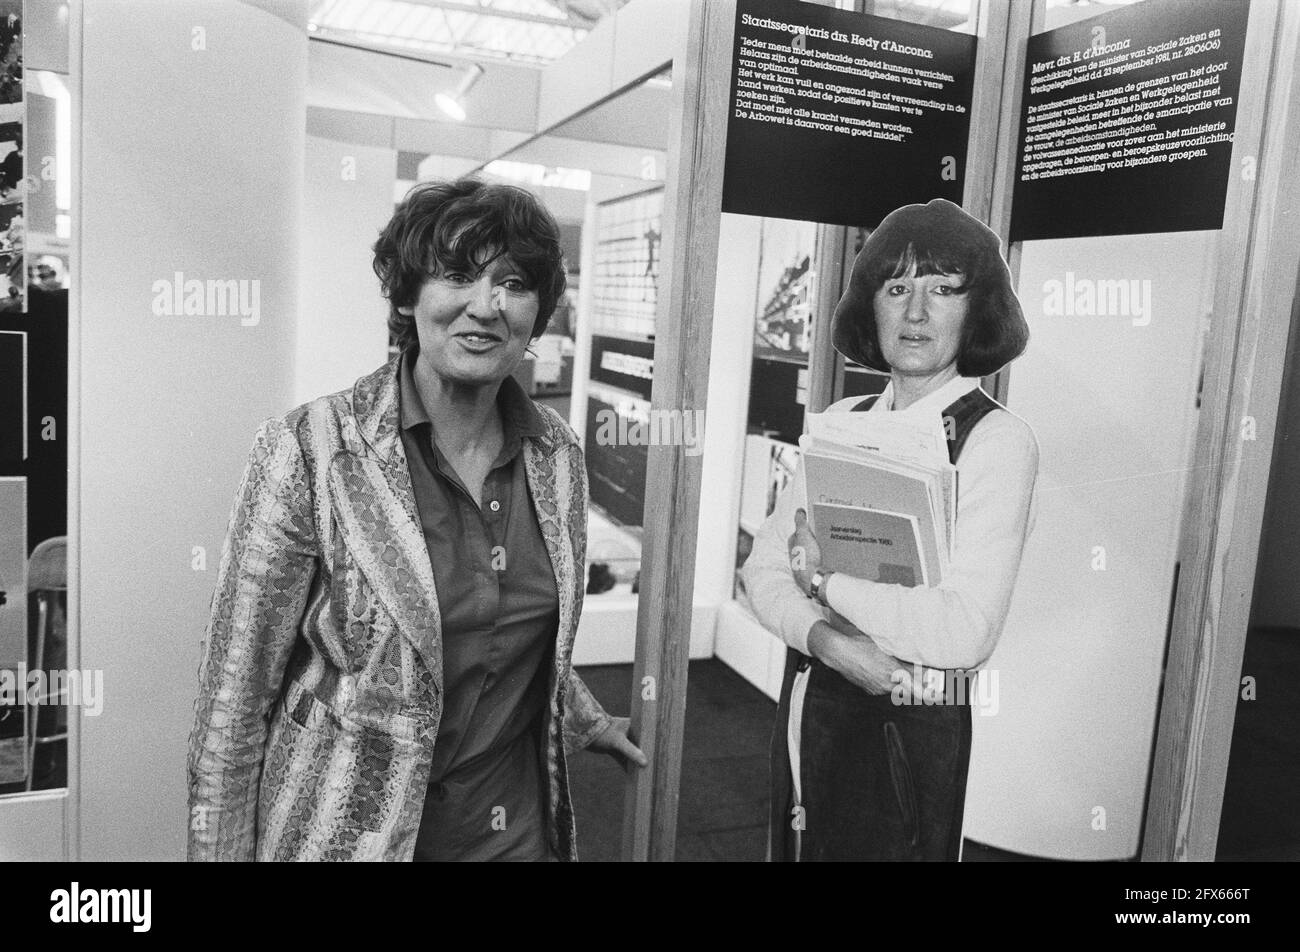 Hedy dAncona opens Arbo 82 at RAI in Amsterdam on safety, health etc. during work. DAncona (l.), April 26, 1982, openings, politicians, The Netherlands, 20th century press agency photo, news to remember, documentary, historic photography 1945-1990, visual stories, human history of the Twentieth Century, capturing moments in time Stock Photo